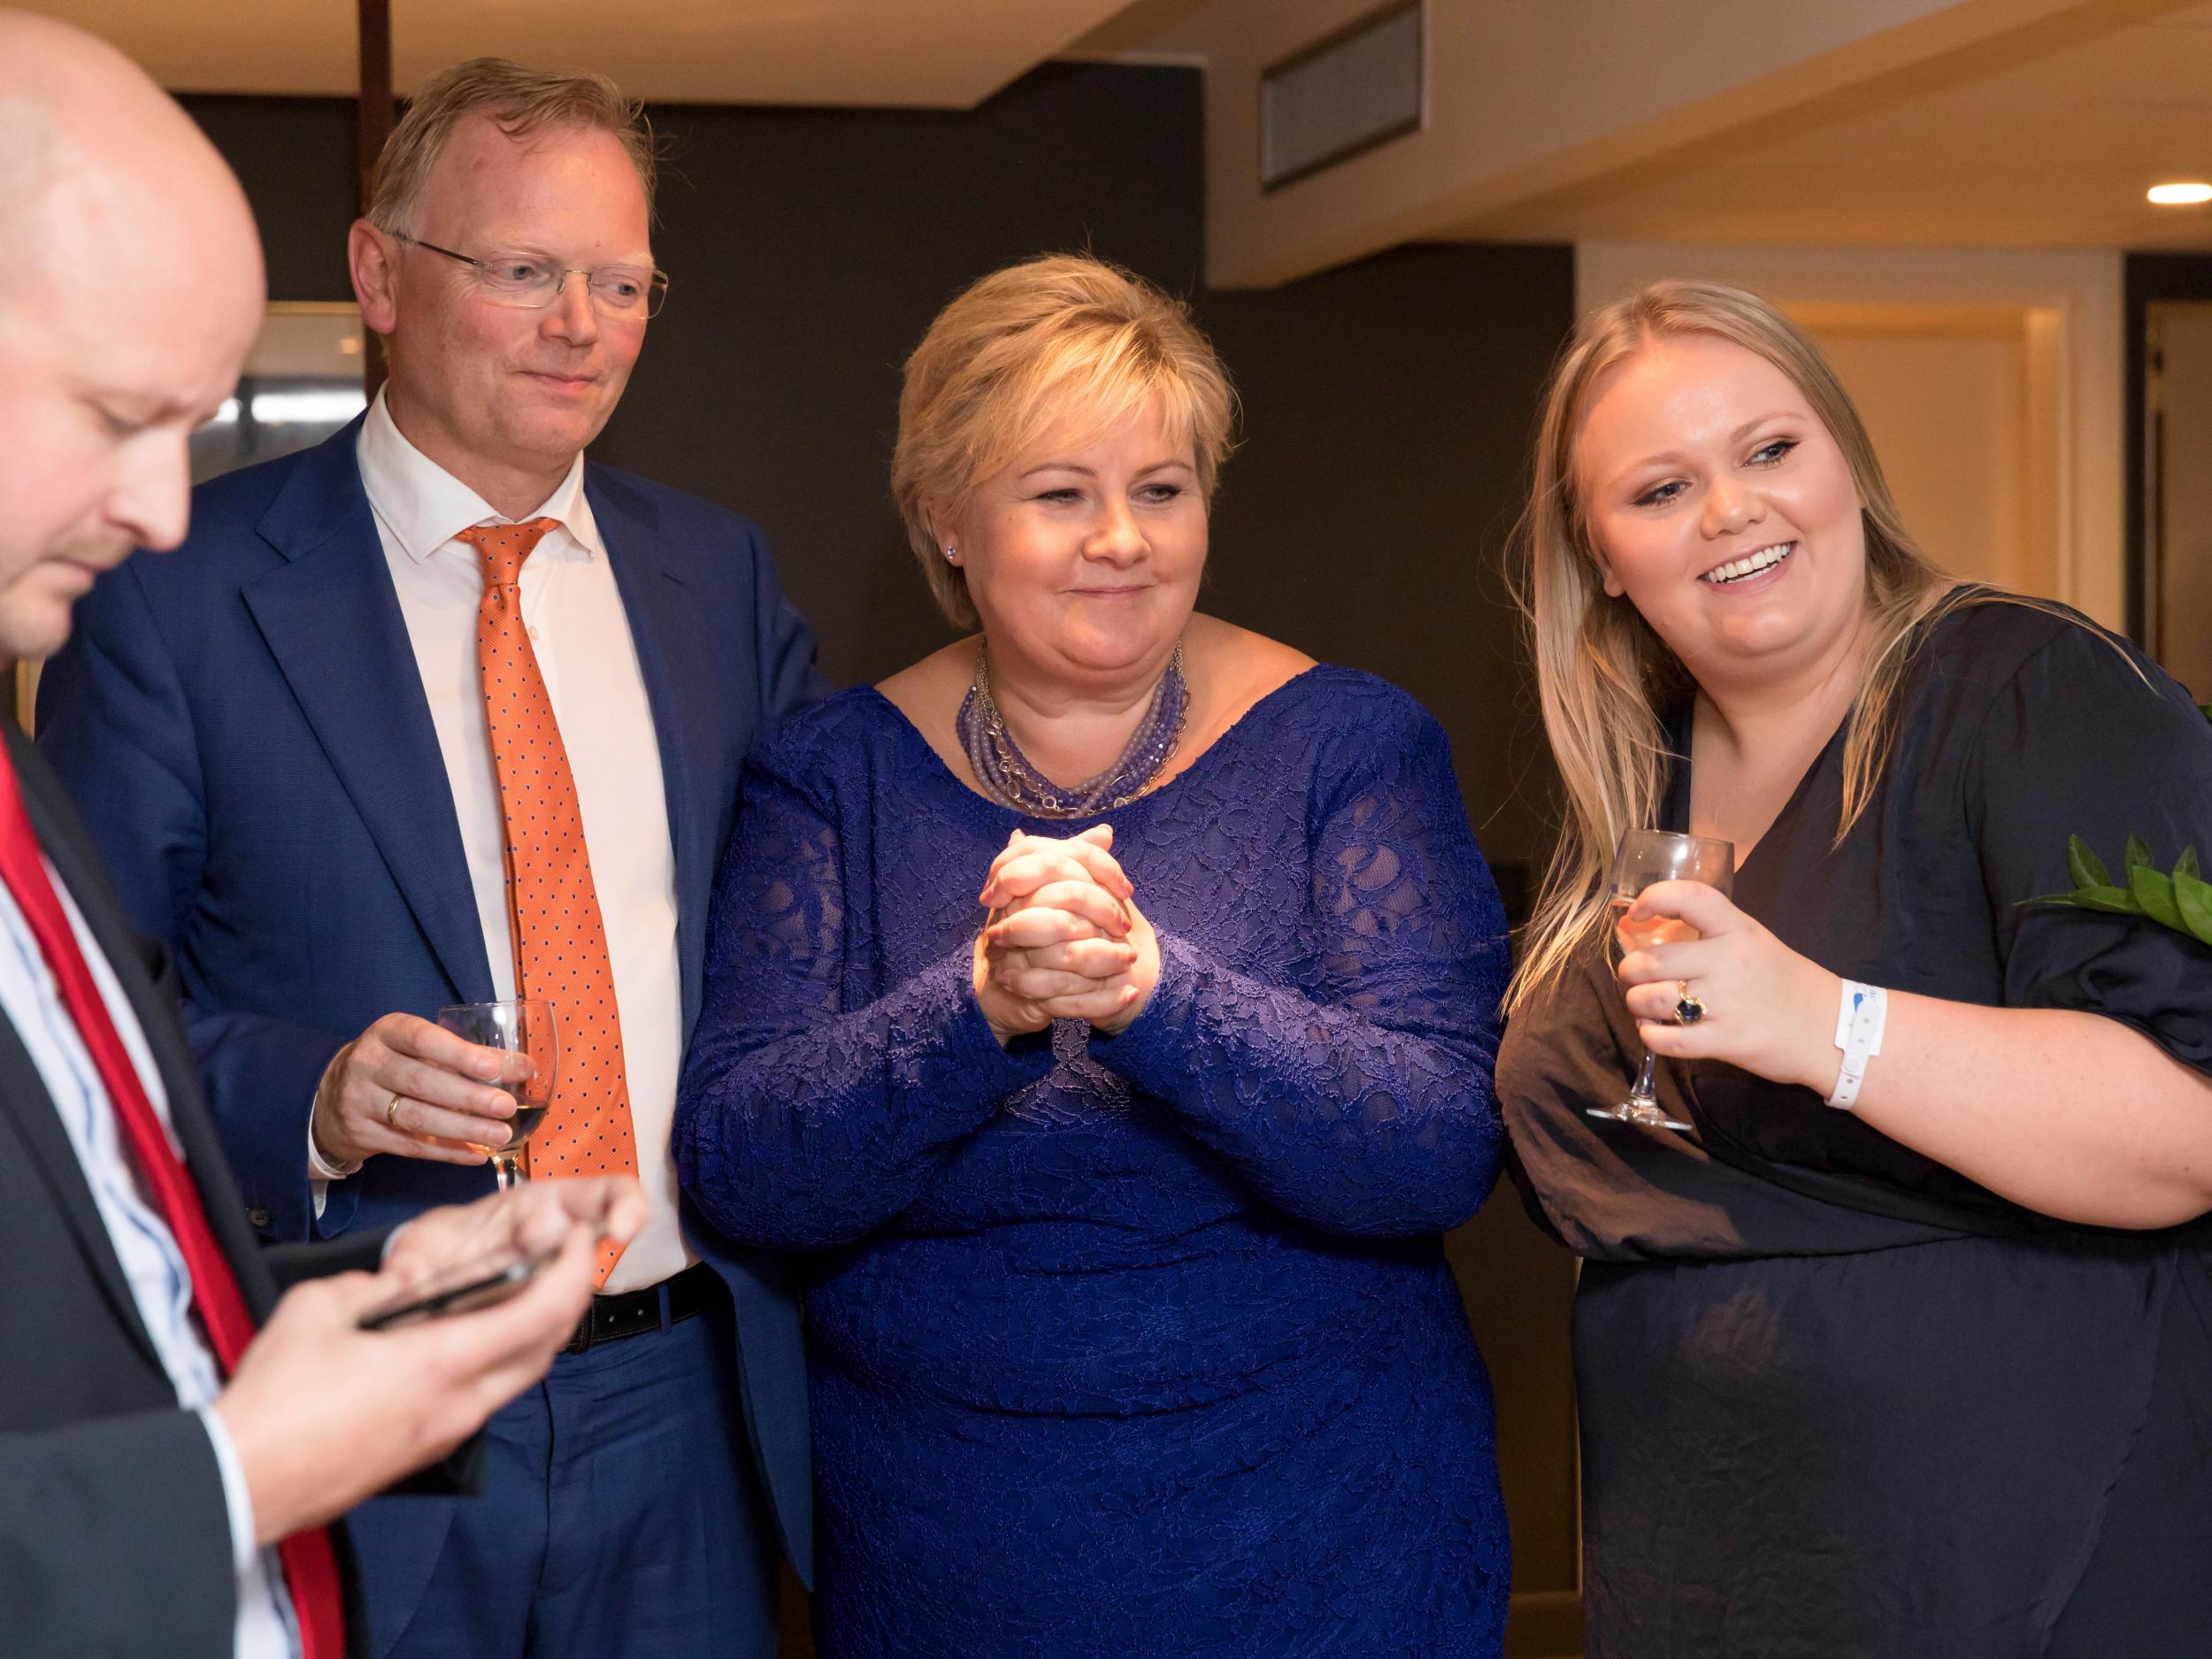 Norway's Prime Minister Erna Solberg, her daughter Ingrid Solberg Finnes and Sgbjorn Aanes, Solberg's adviser react to the good results for Solberg's Conservative Party in Oslo on 11 September 2017